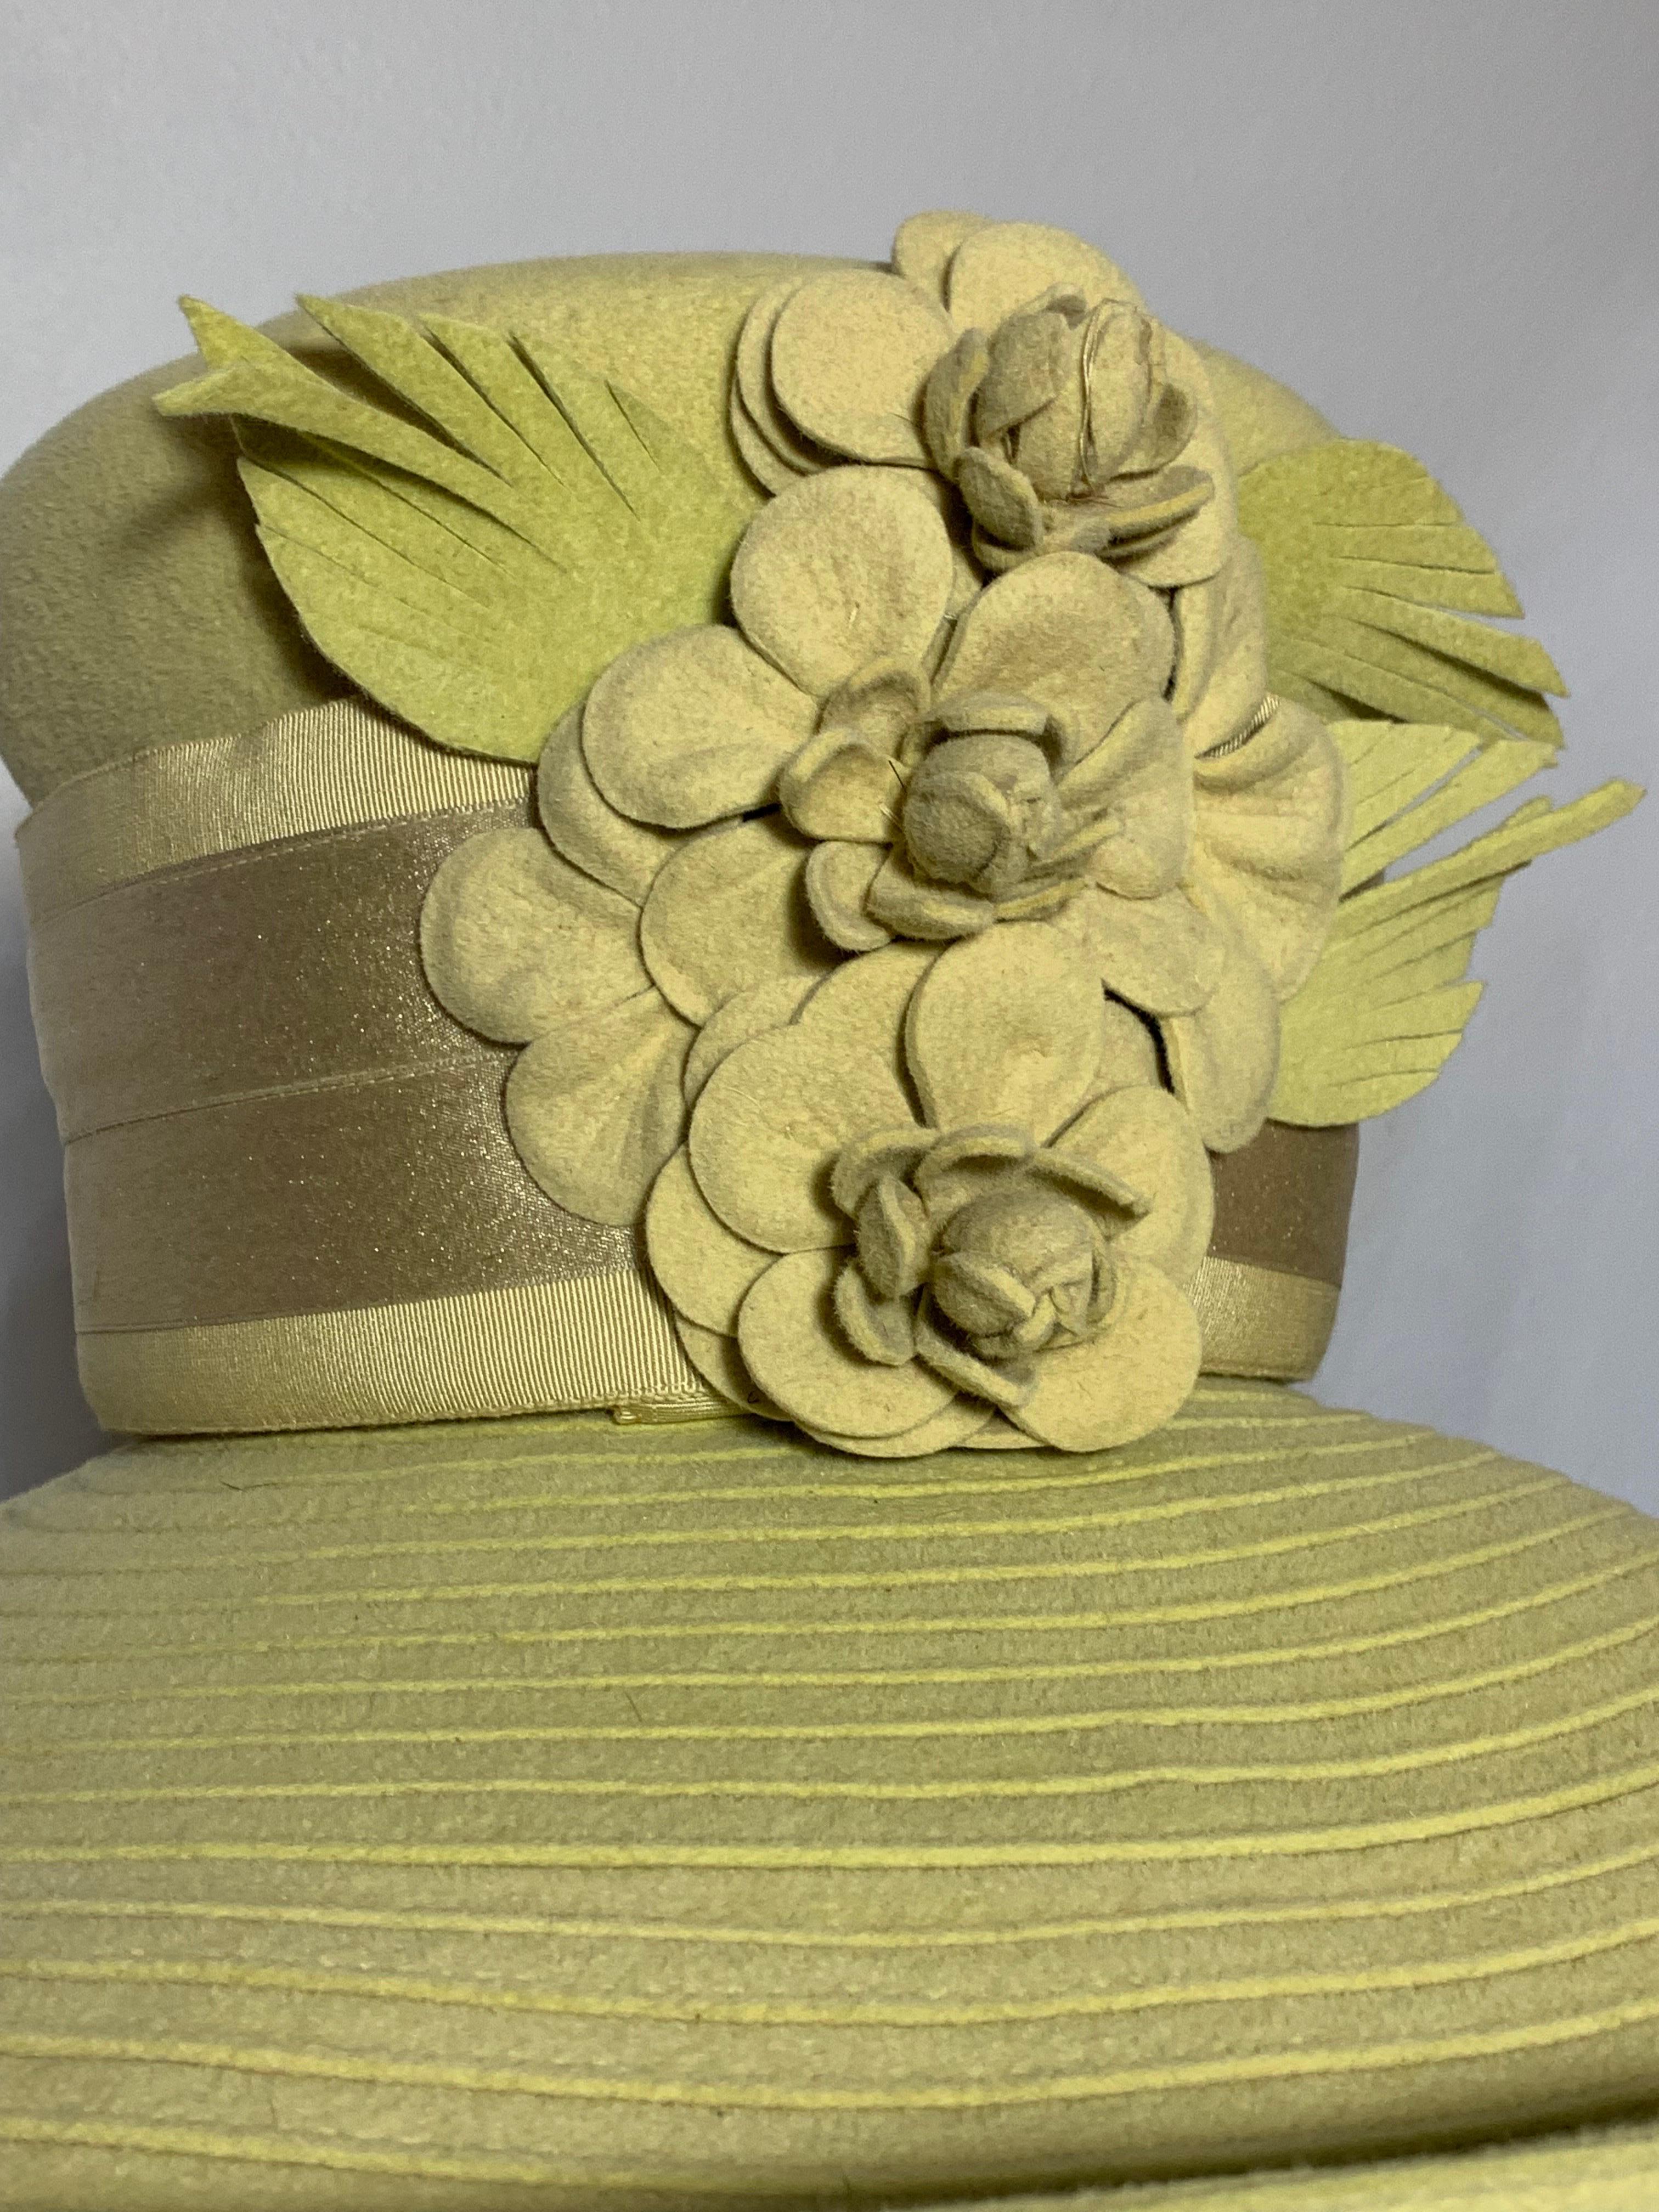 Maison Michel Autumn/Winter Citrine Wool Felt Large-Brim Hat w Camellias & Ribbon Band:  Large brim is worked in concentric stitched circles as a straw would be made. Tall wide crowned hat has wired brim, and contrasting wide ribbon hat band and